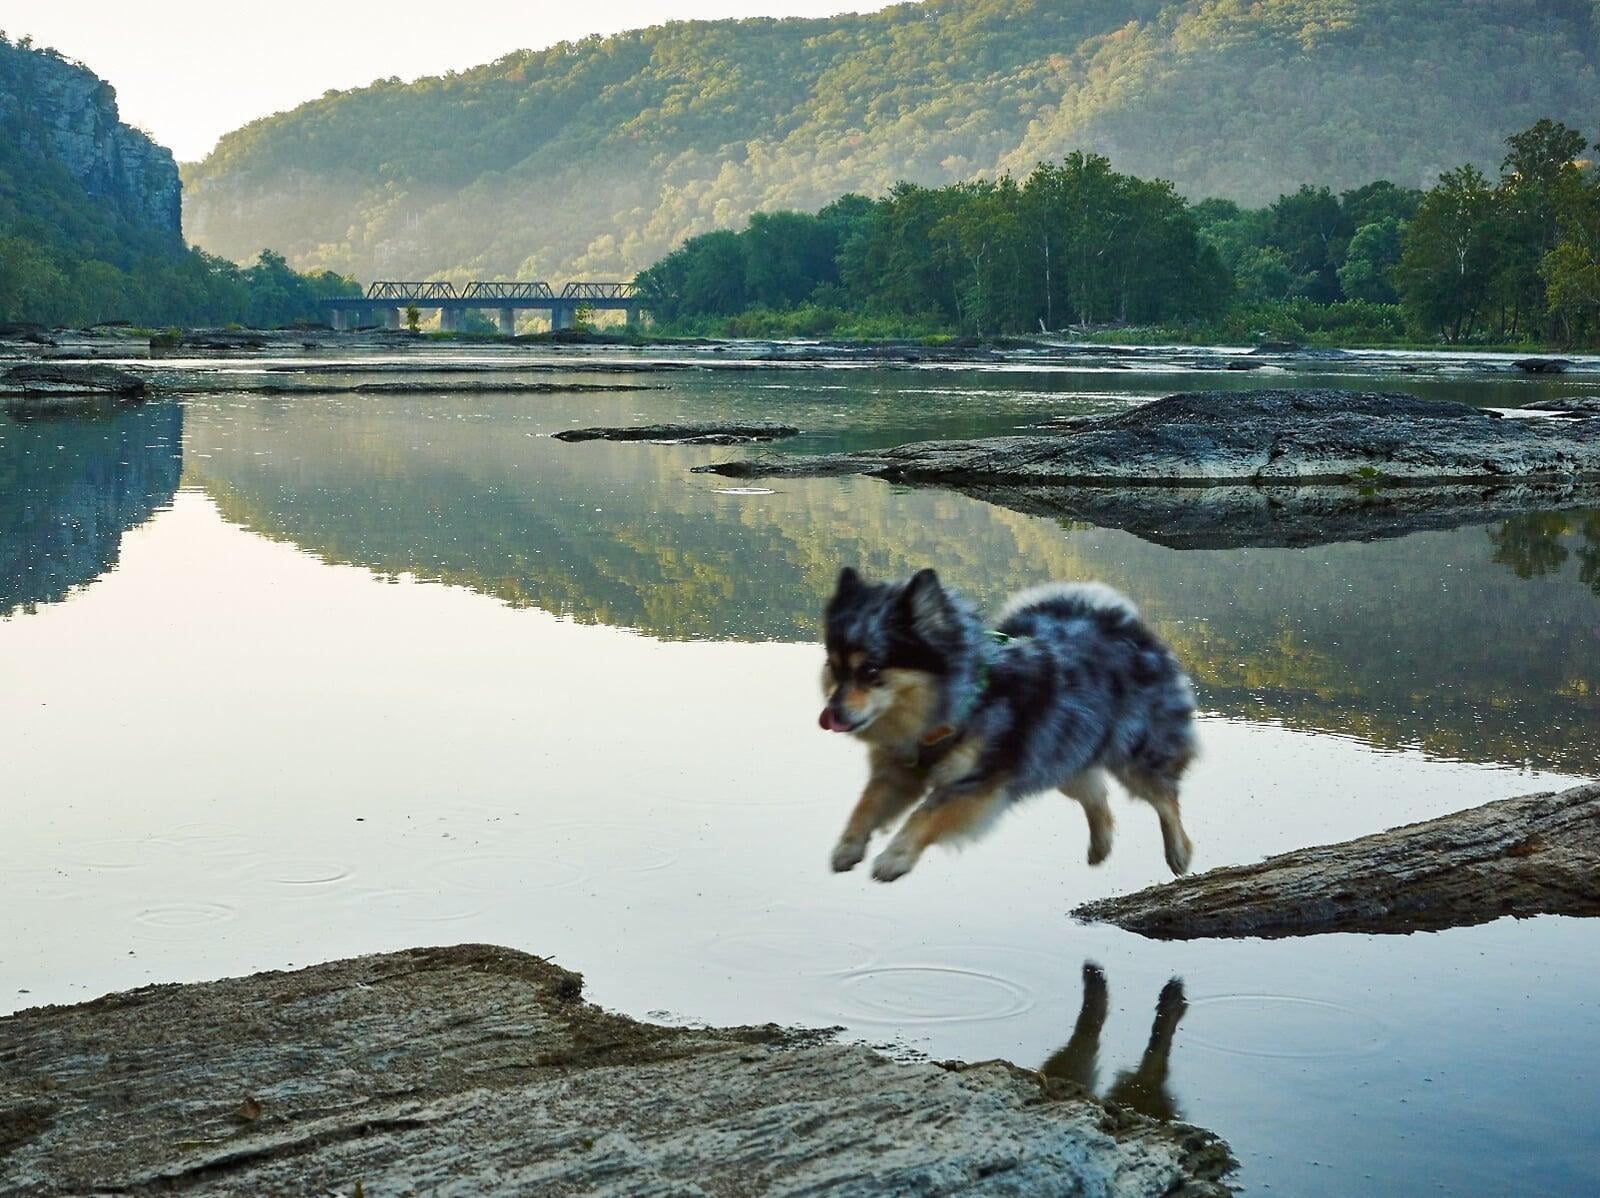 Tinny the Pomeranian jumping stones in the Potomac River at sunrise